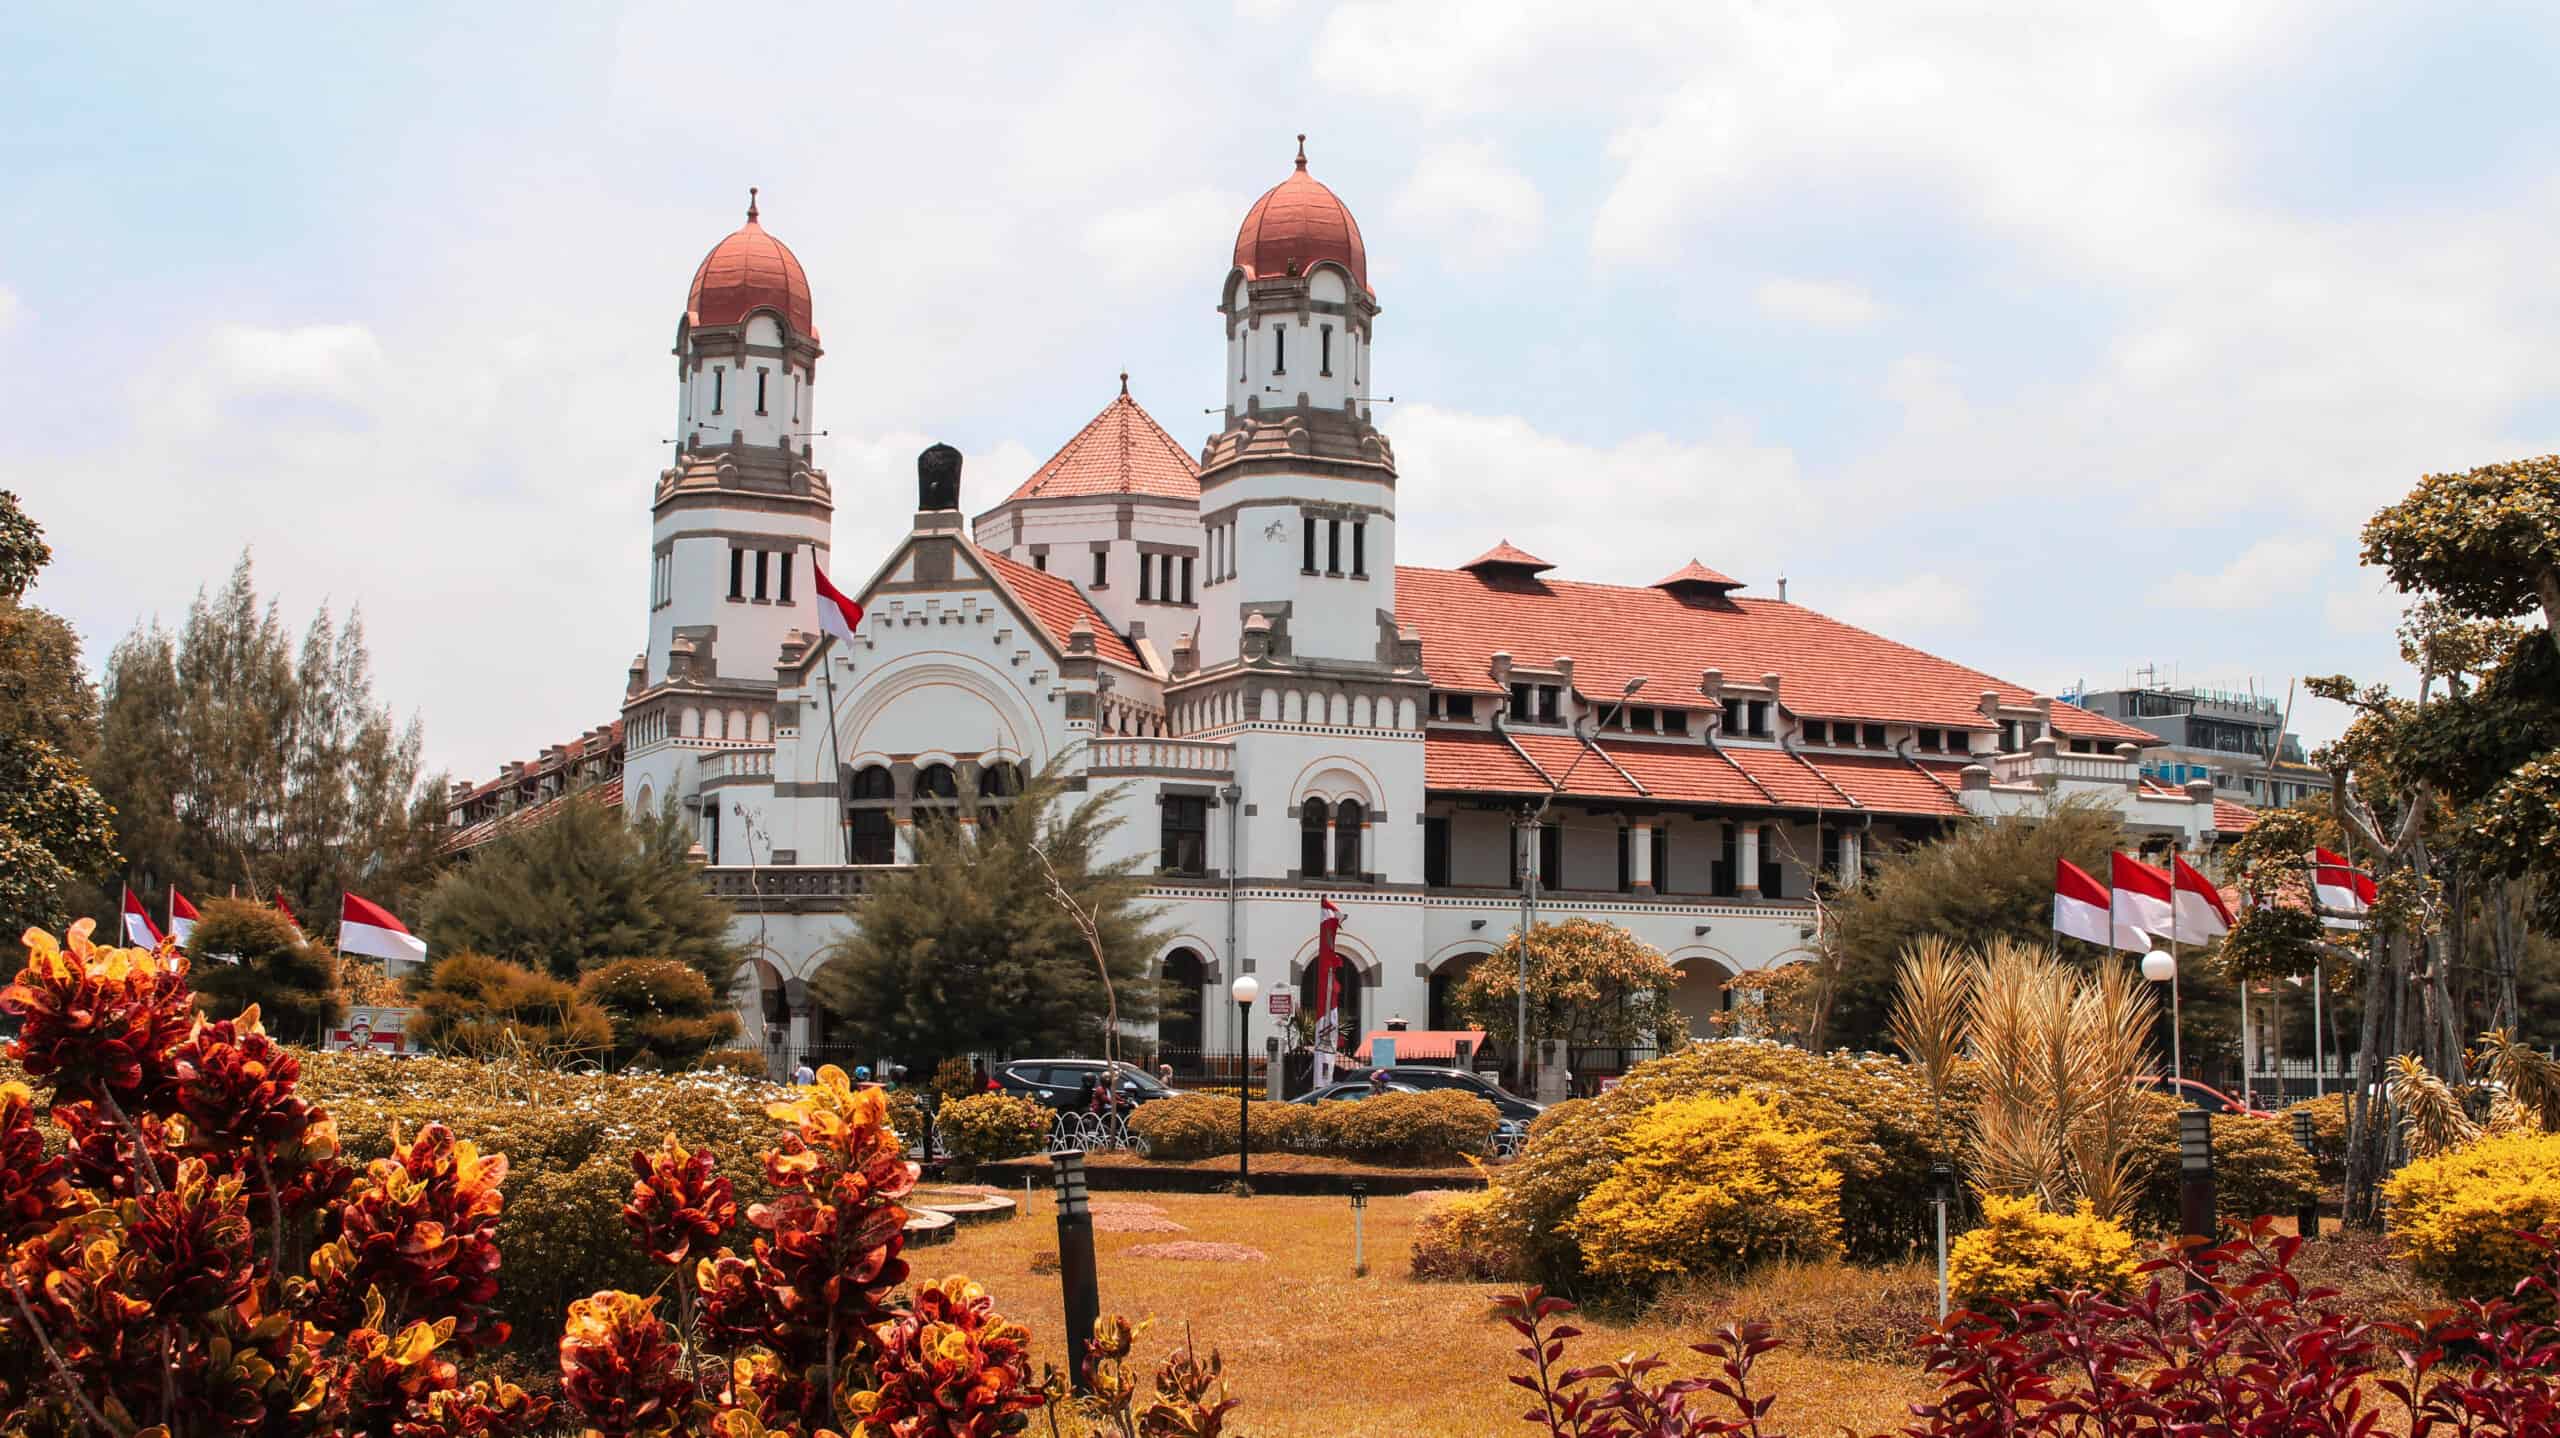 The image shows the Lawang Sewu building in Semarang, Indonesia, which is known for its unique architecture and is said to be haunted.